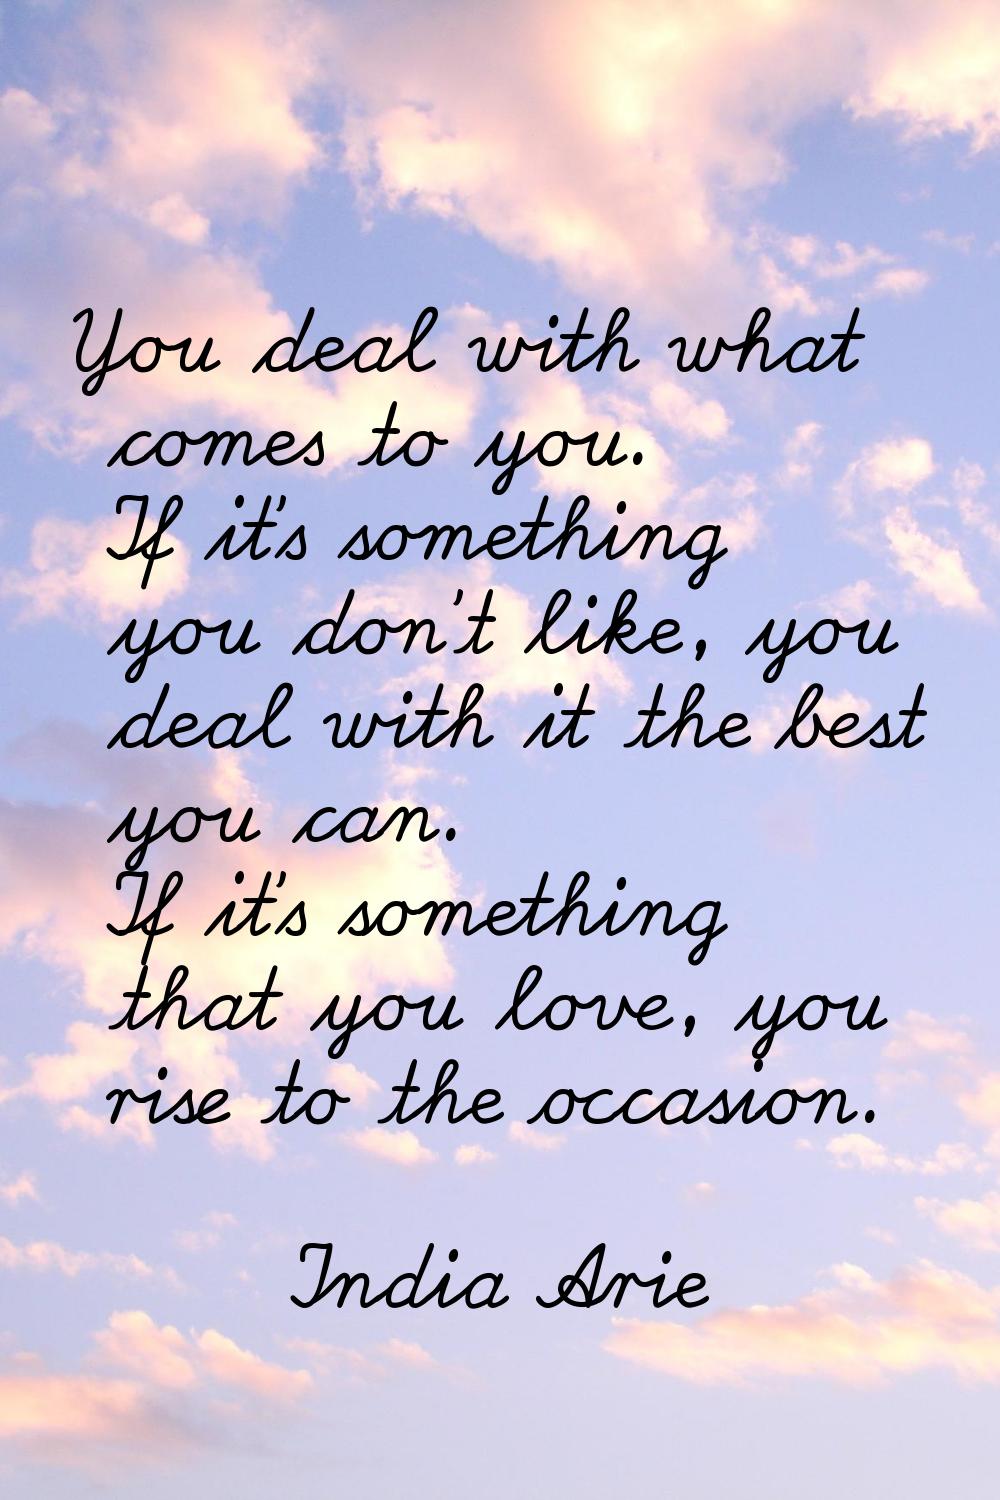 You deal with what comes to you. If it's something you don't like, you deal with it the best you ca